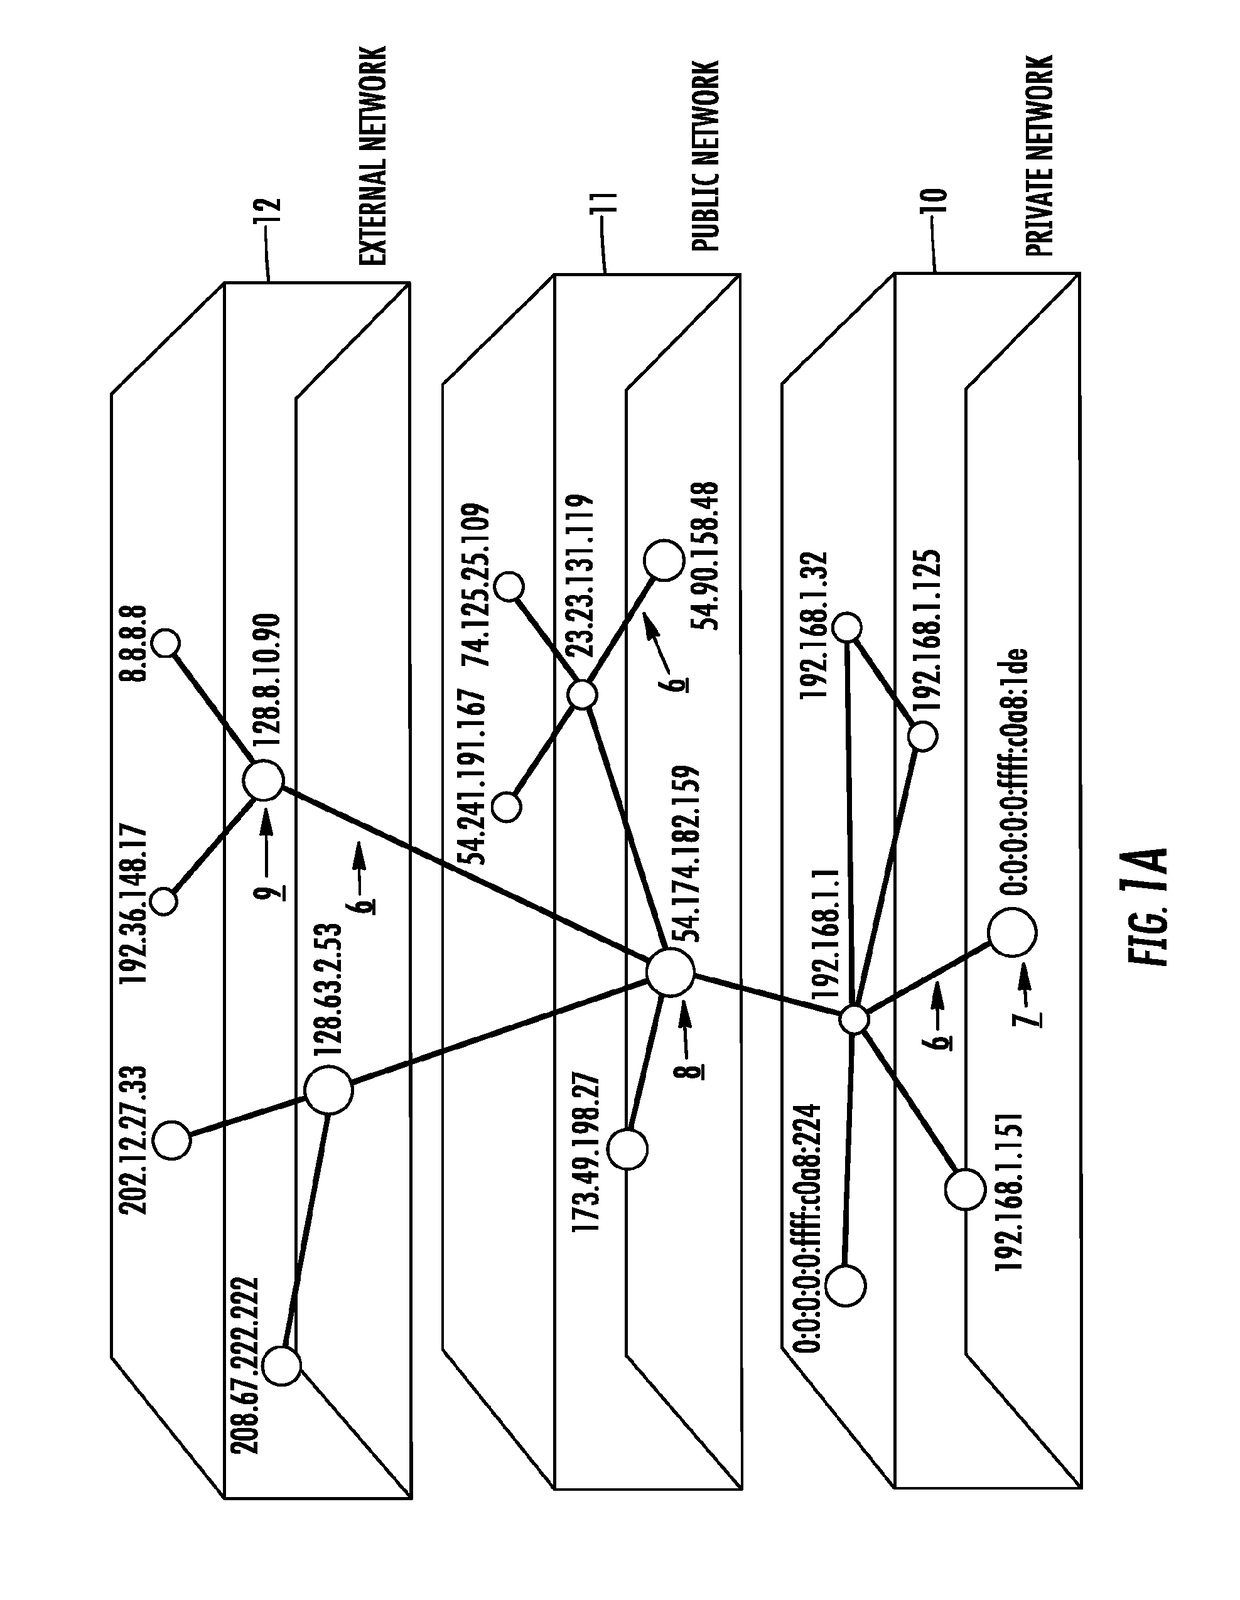 Network Security Monitoring and Correlation System and Method of Using Same